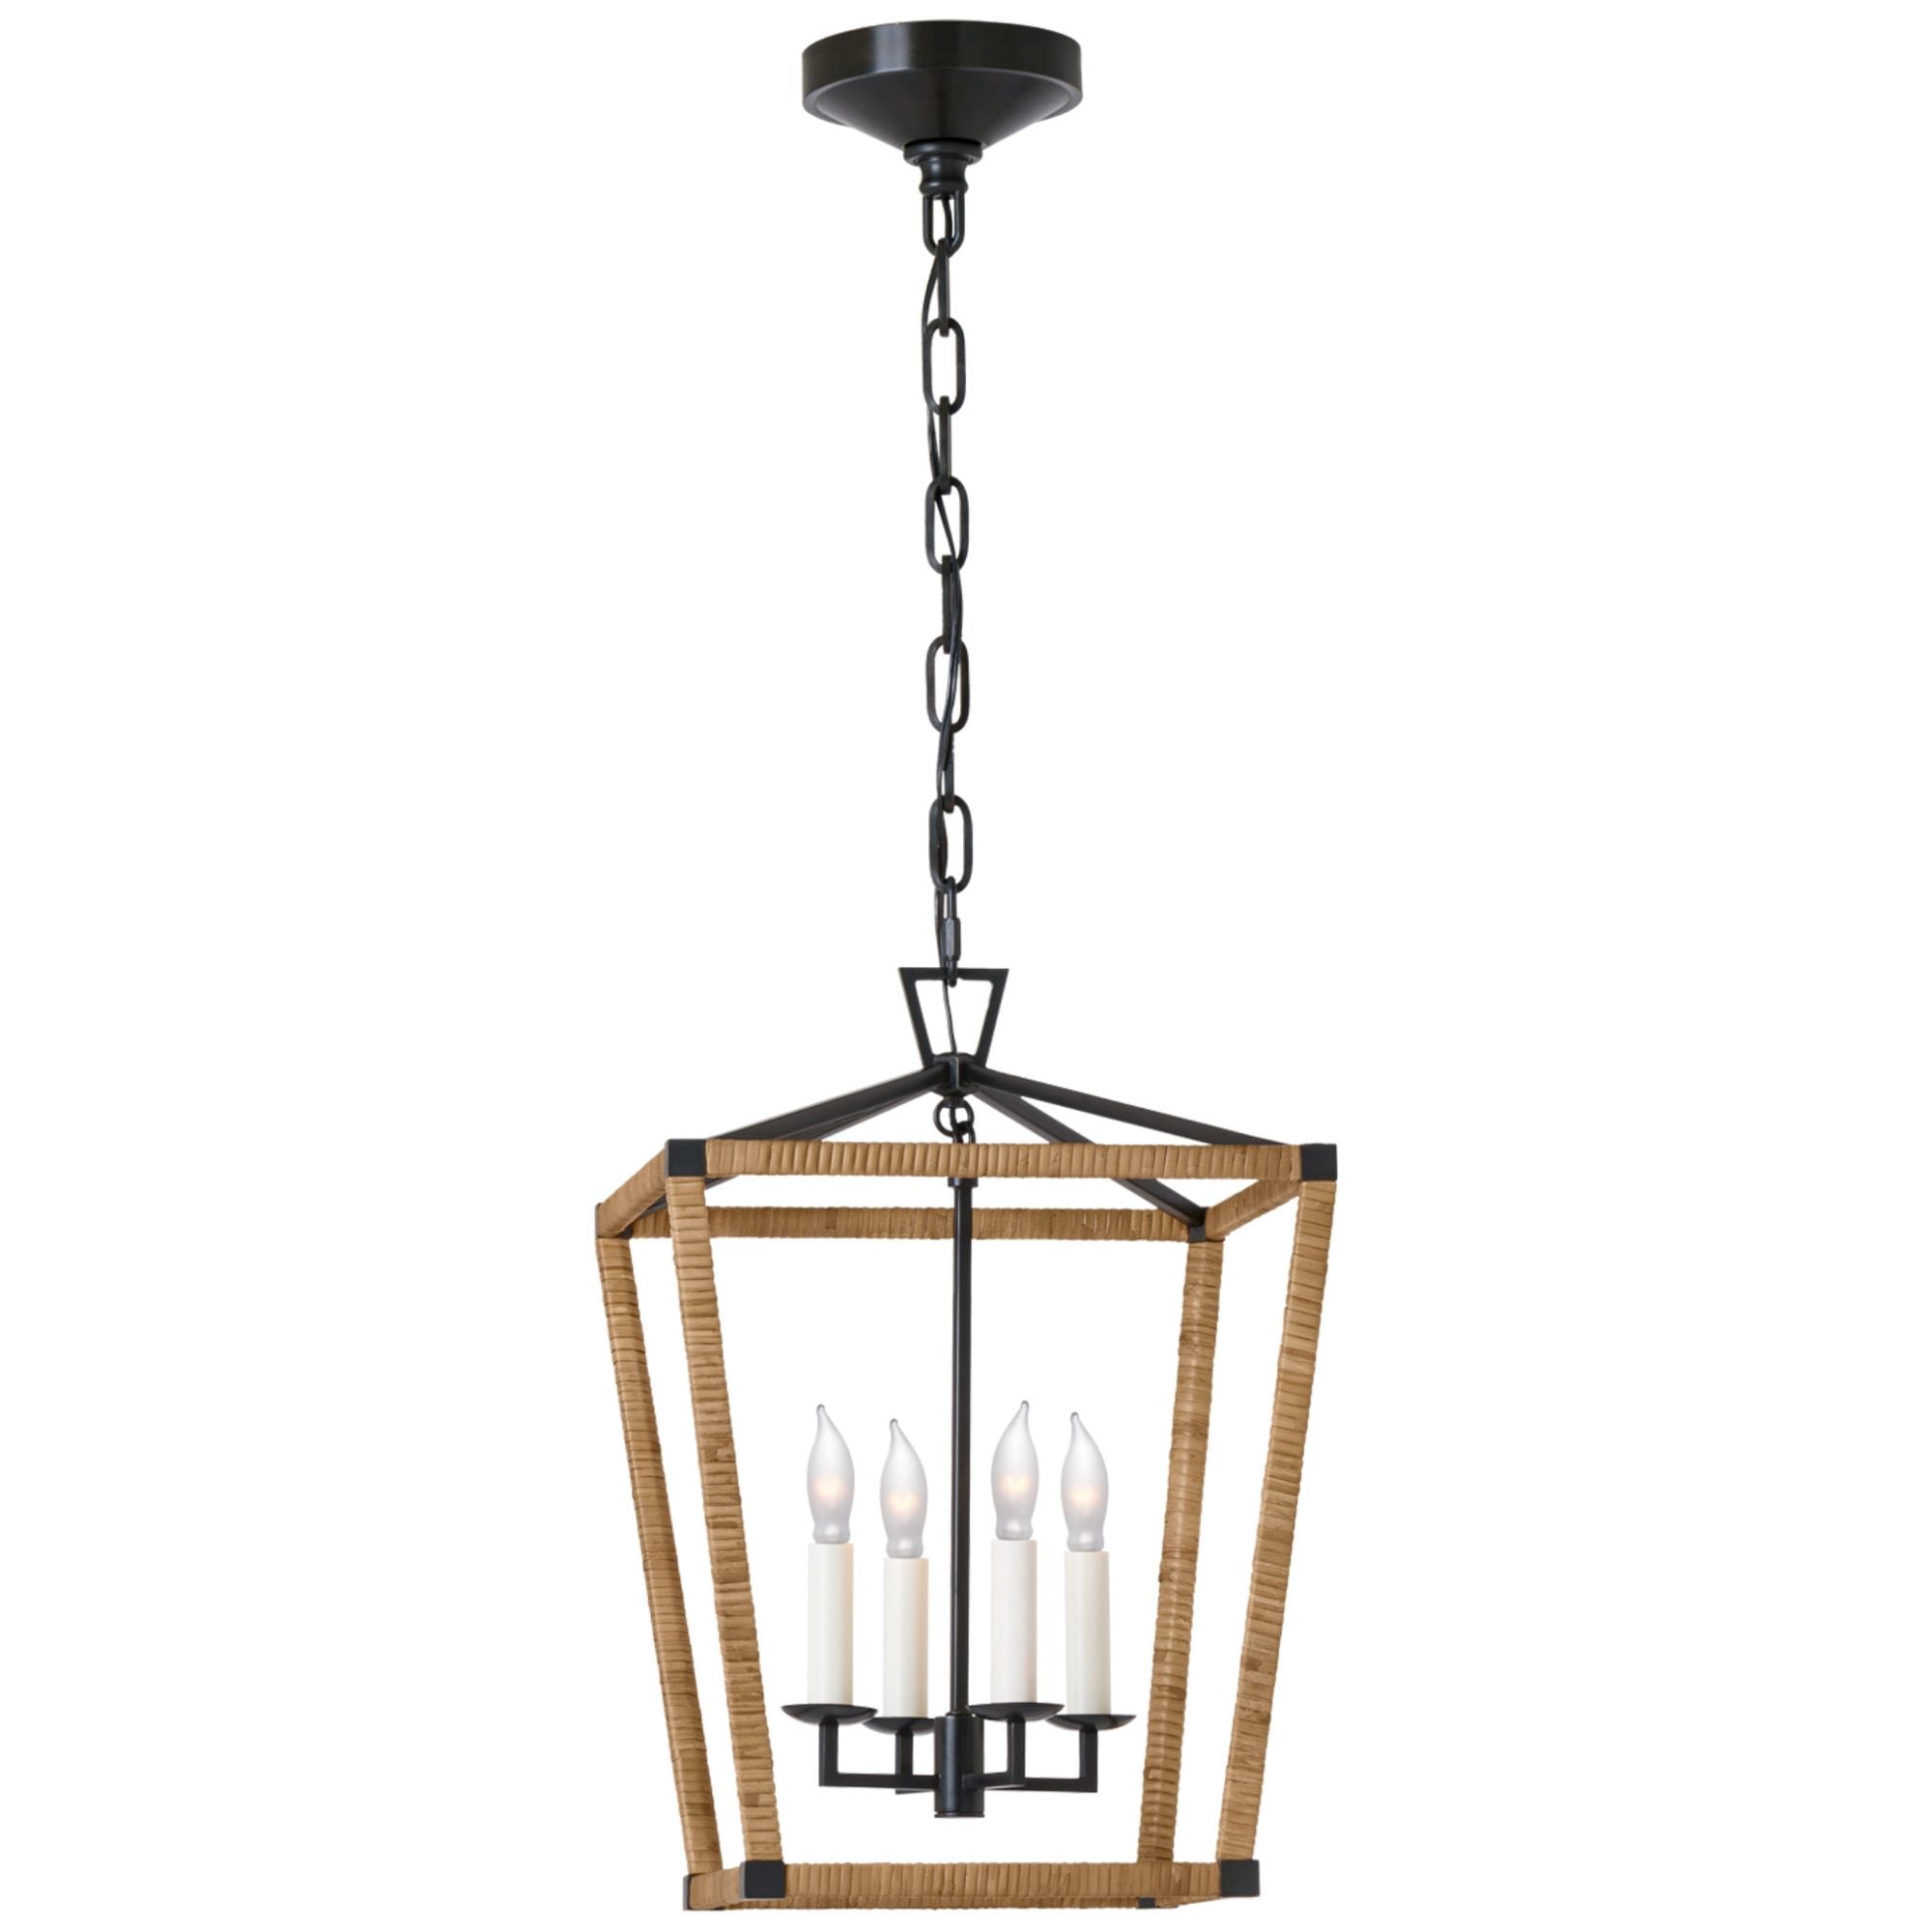 Chapman & Myers Darlana Small Wrapped Lantern in Aged Iron and Natural Rattan